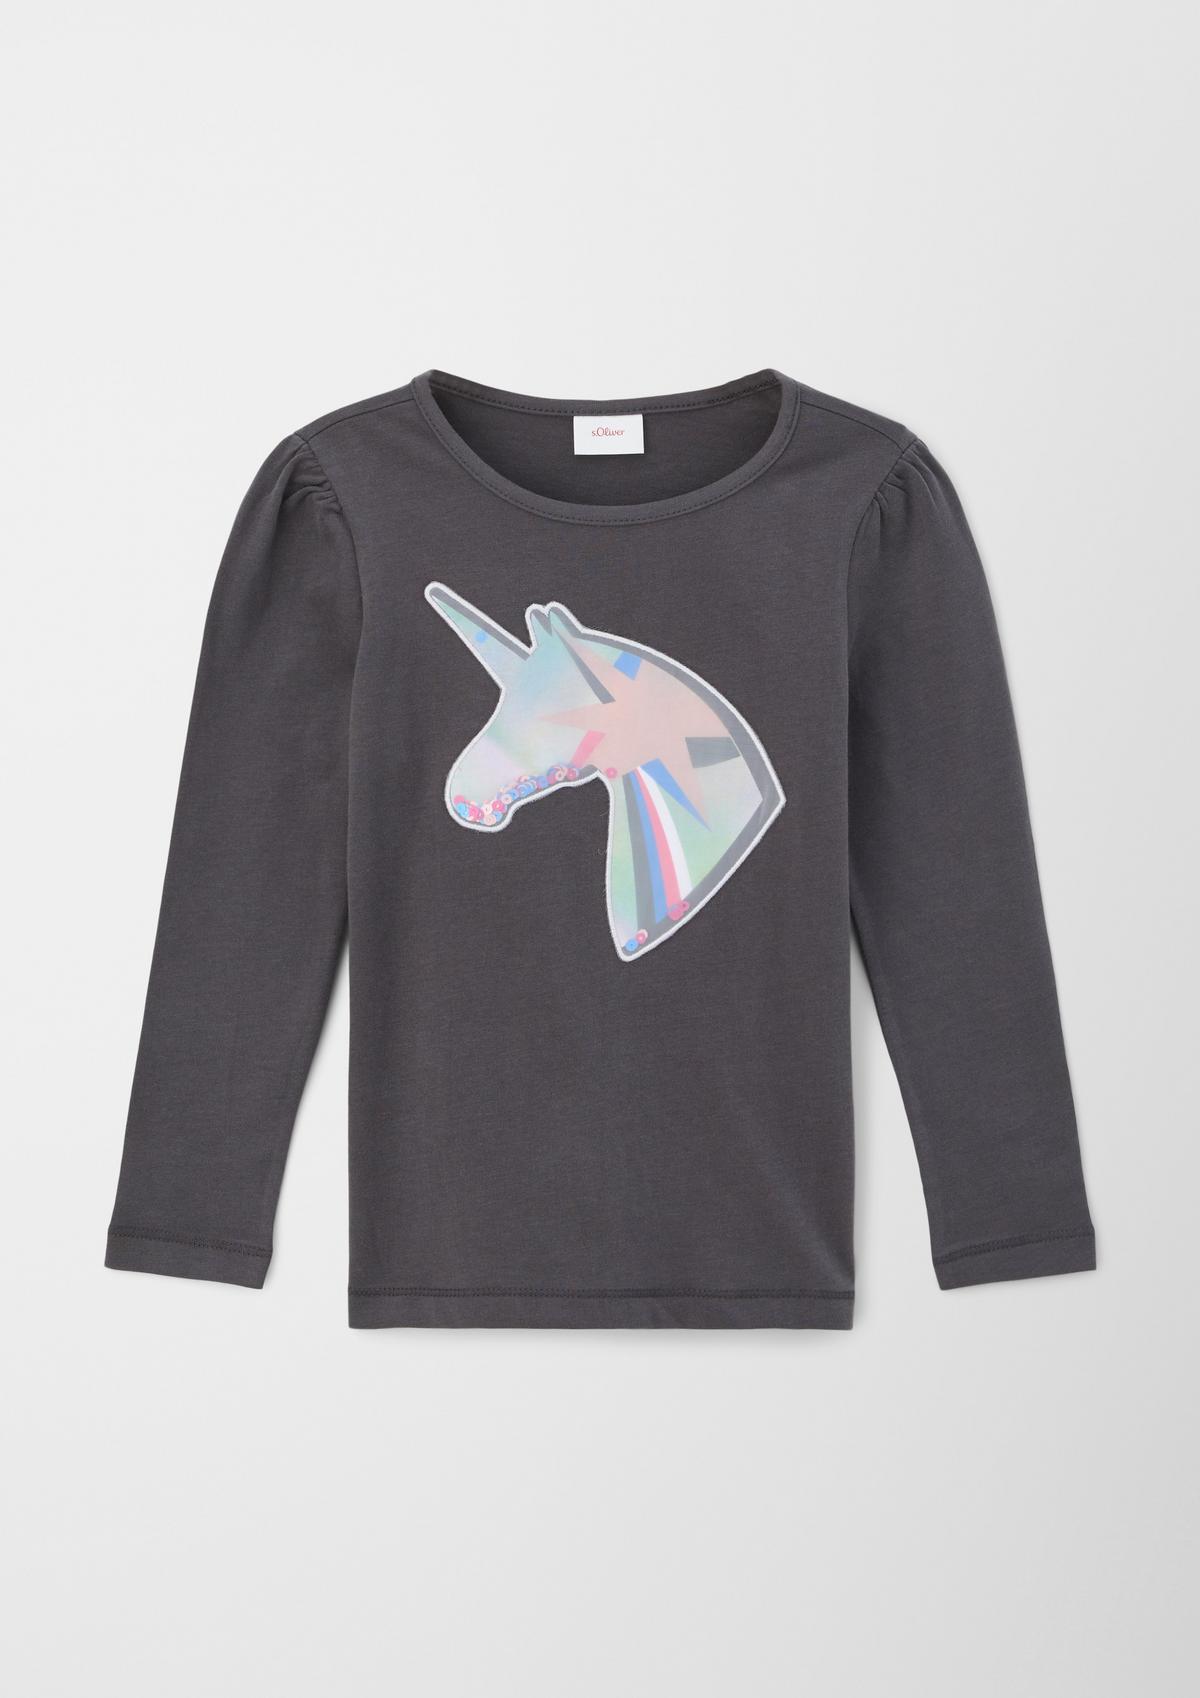 s.Oliver Long sleeve top with unicorn artwork